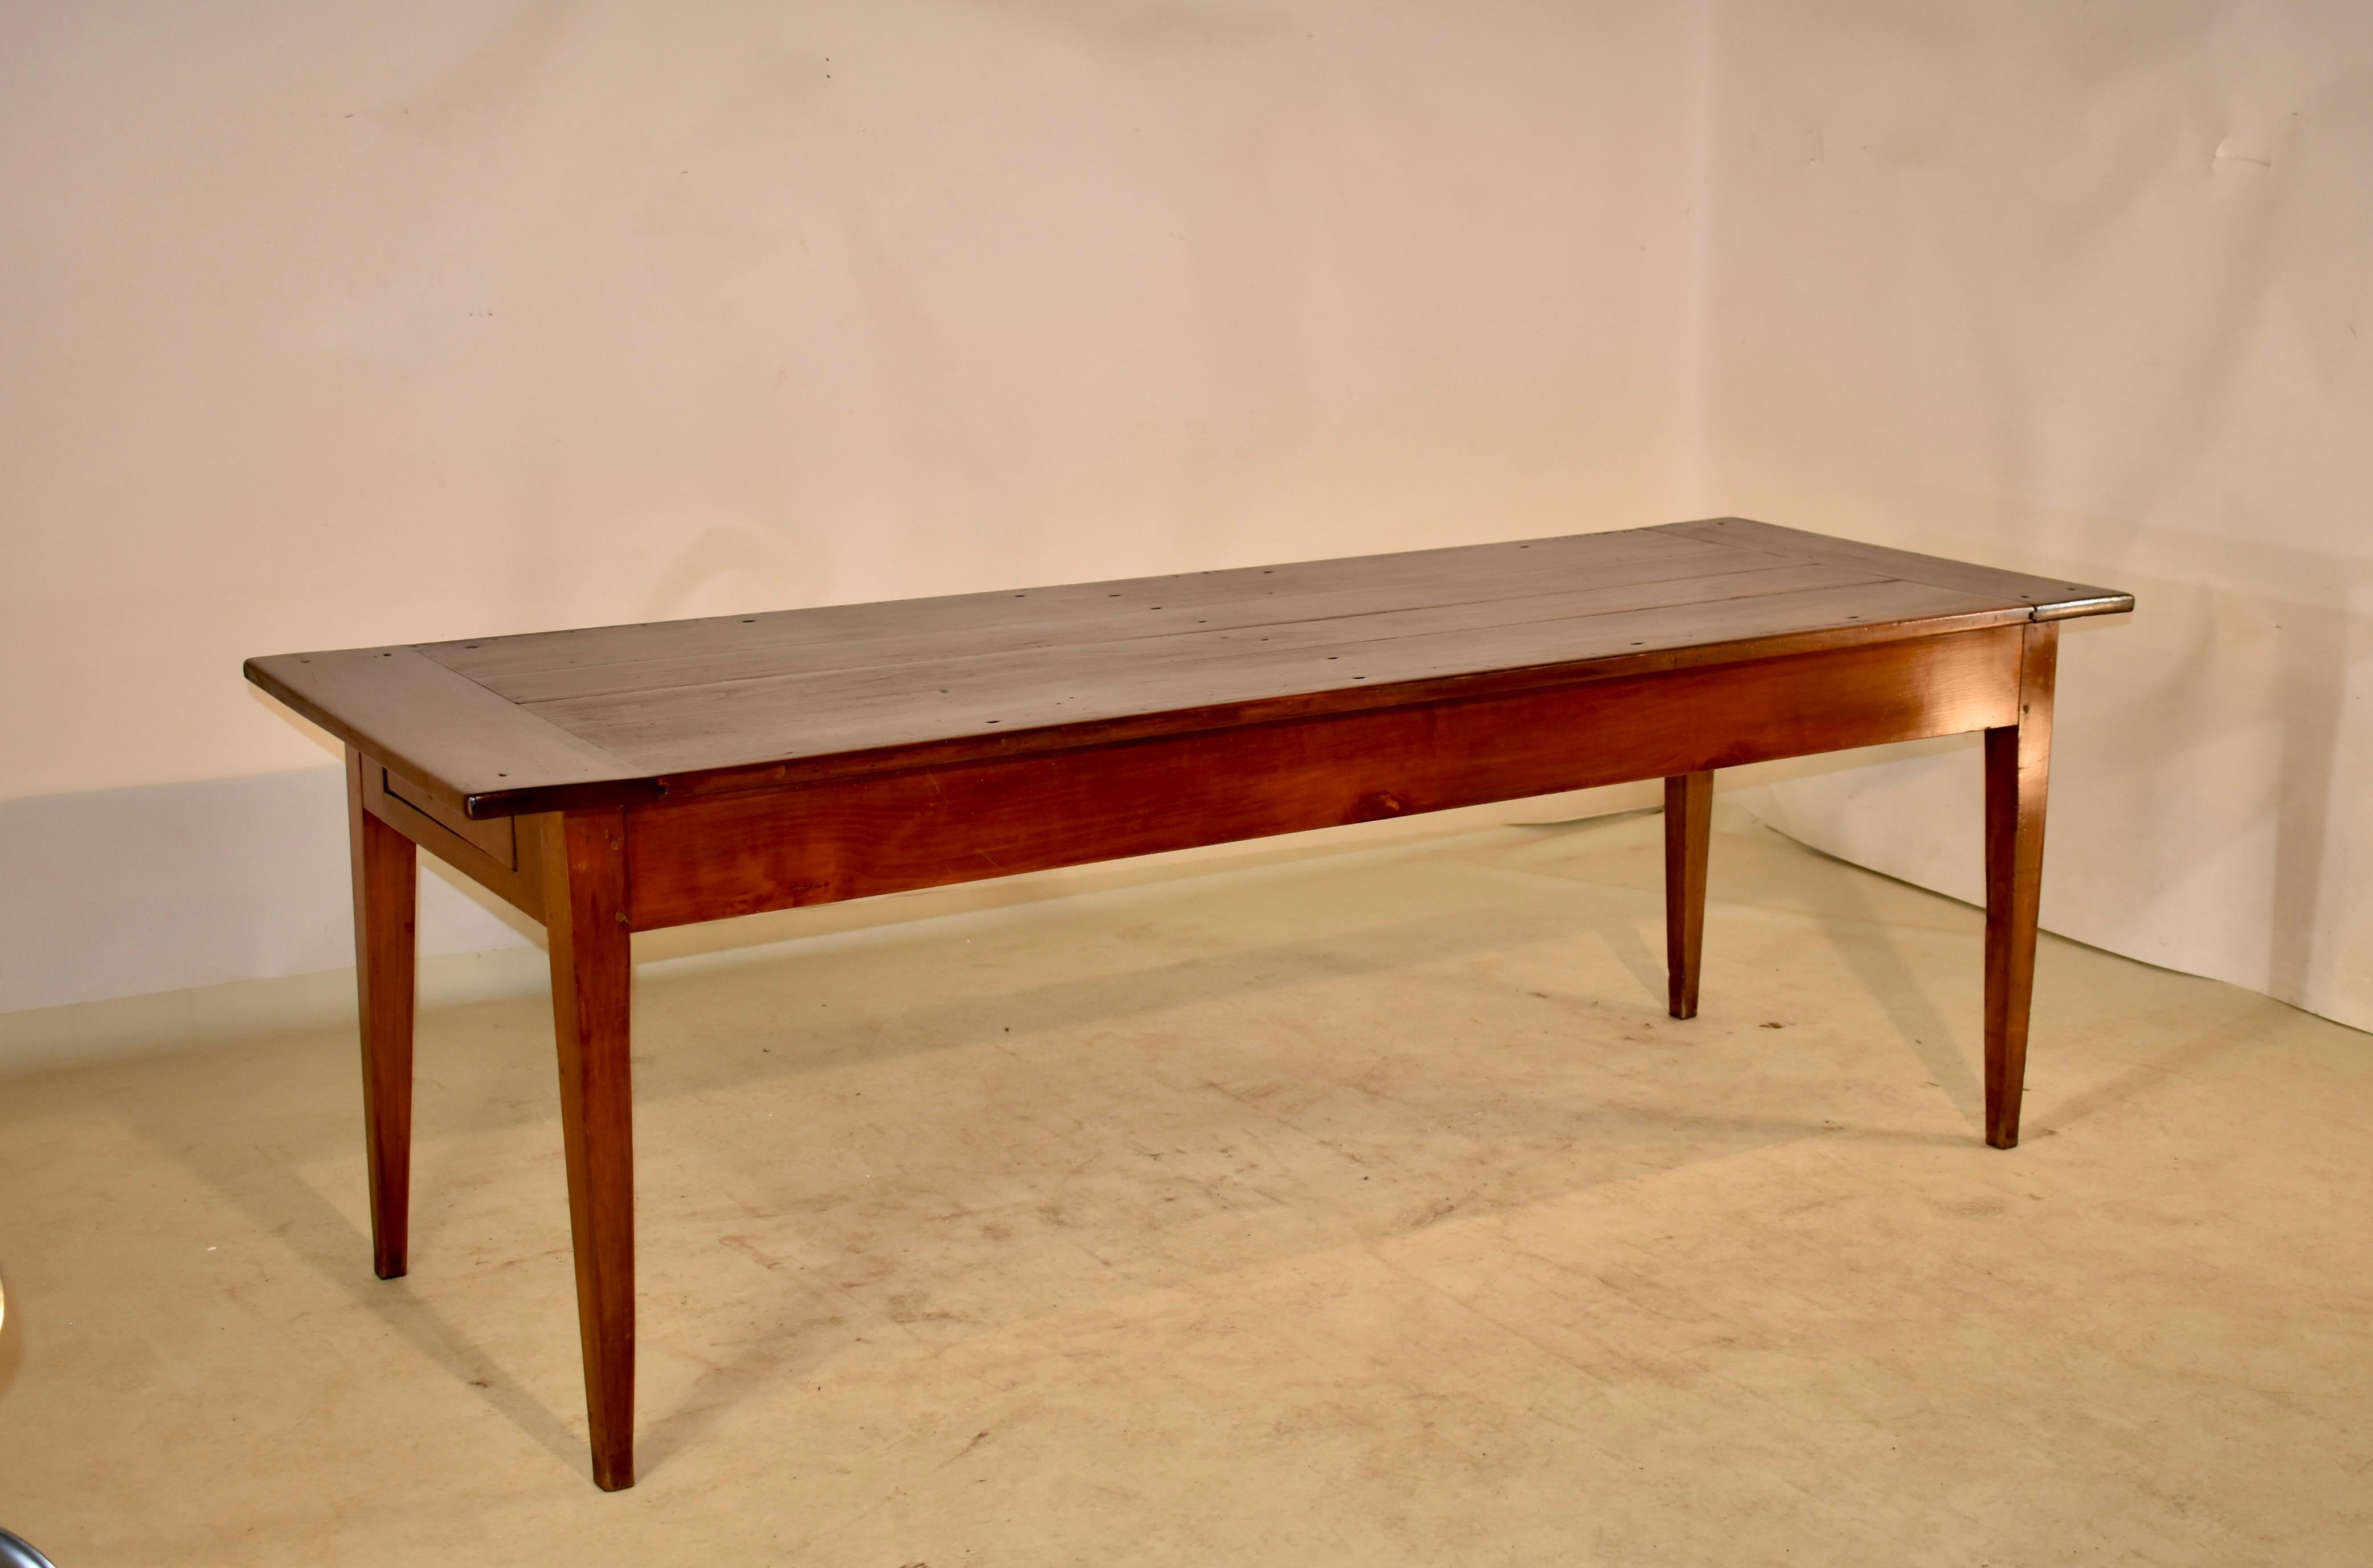 Late 18th century cherry farm table from France with a banded top, which has hand cut nail and pegged construction over a simple apron which contains a single drawer. The table is supported on hand tapered legs. The apron measures 23 inches in